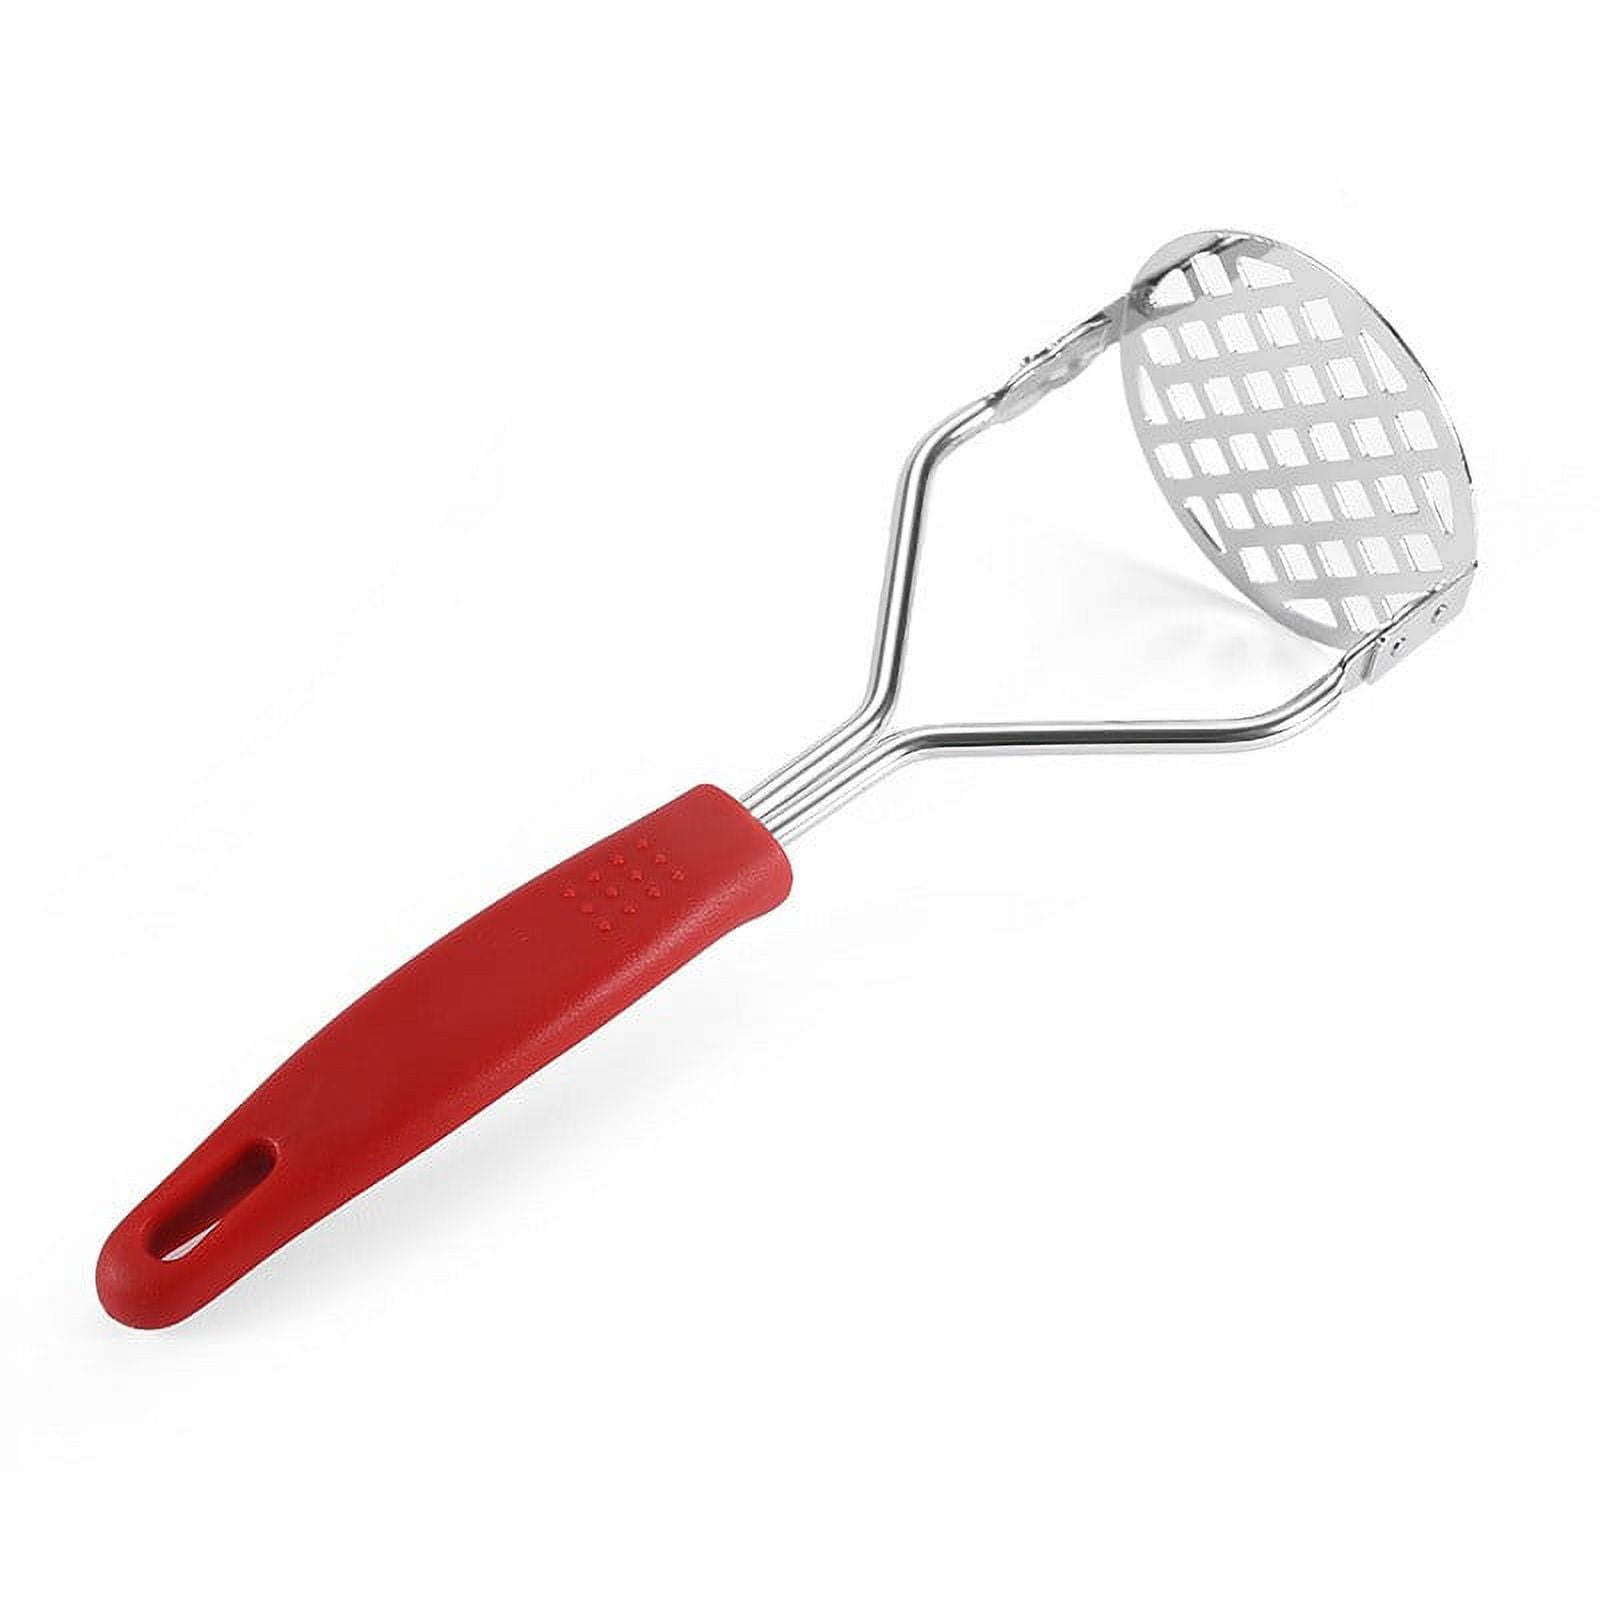 Professional Heat Resistant Meat Potato Masher Vagetables Crusher